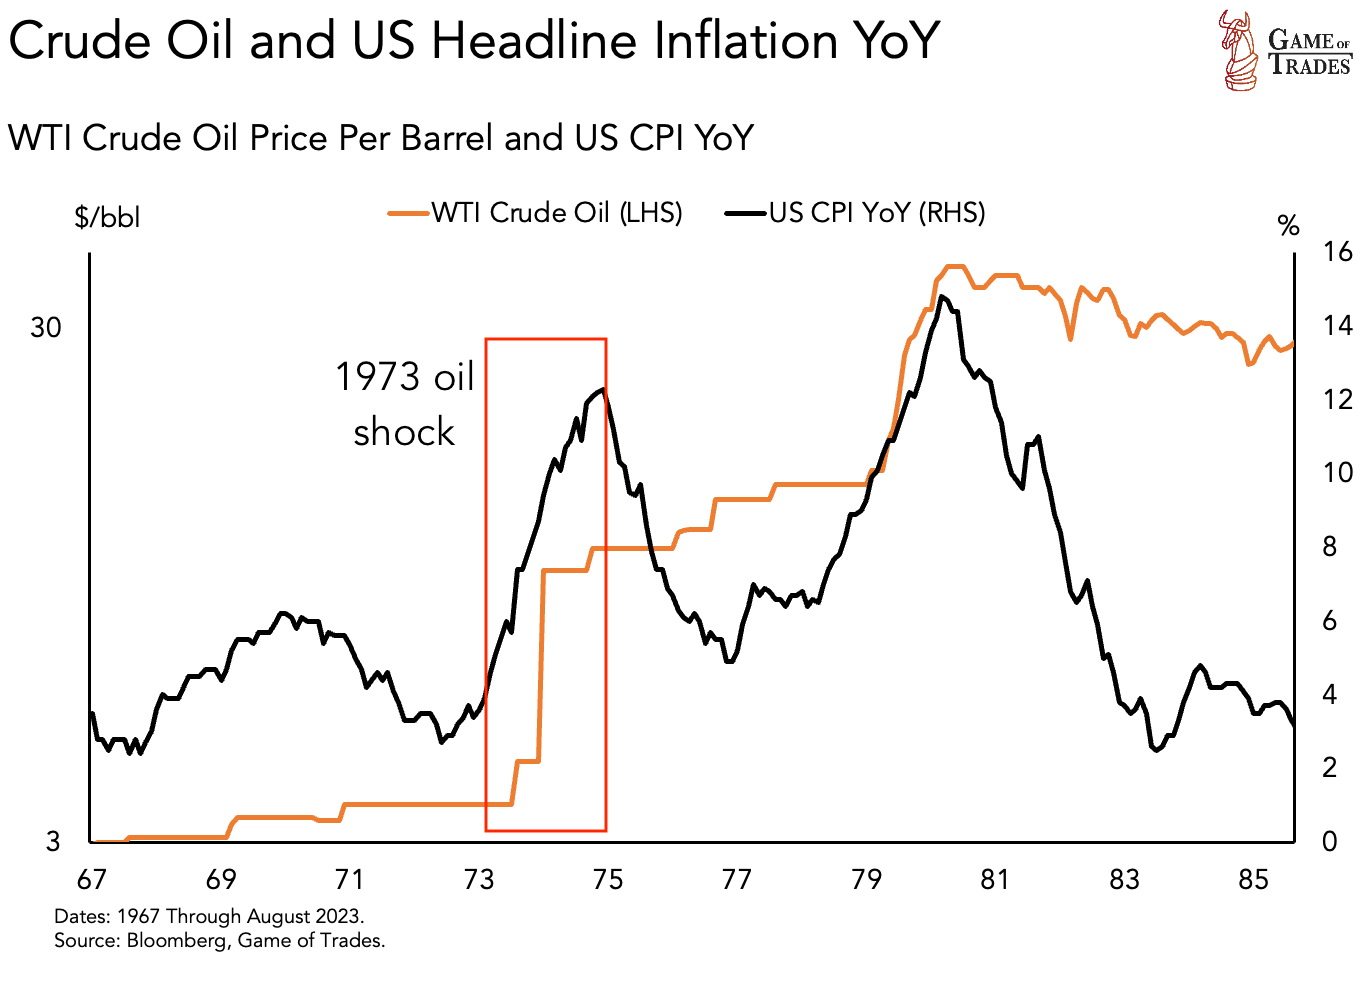 Oil Prices and Inflation